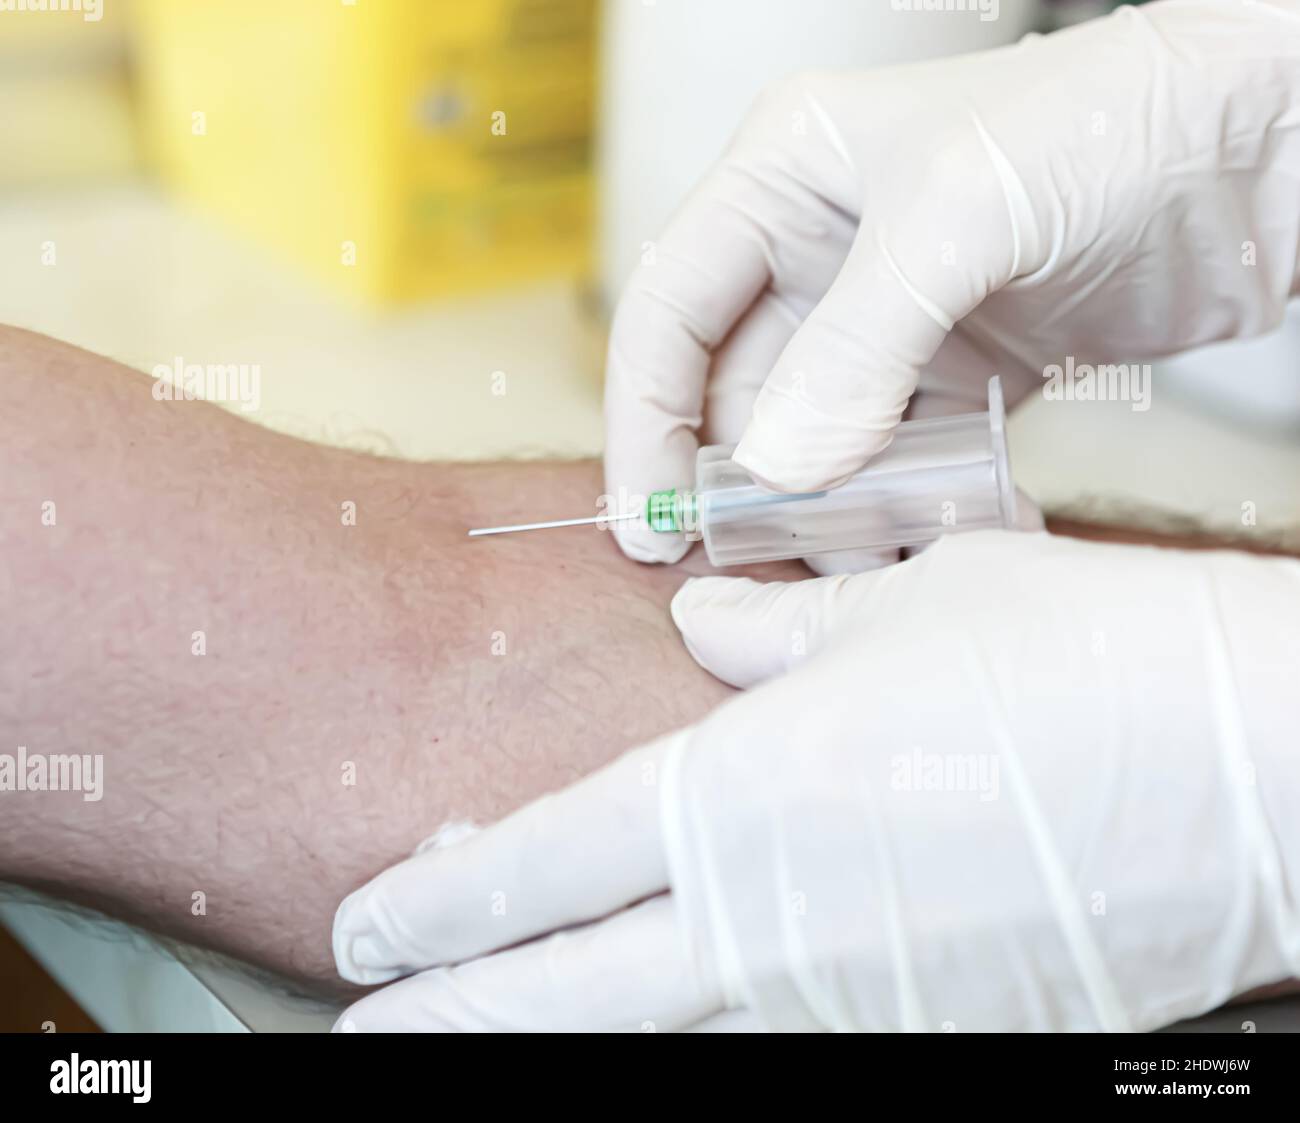 blood sample, blood collection, blood samples, blood collections Stock Photo